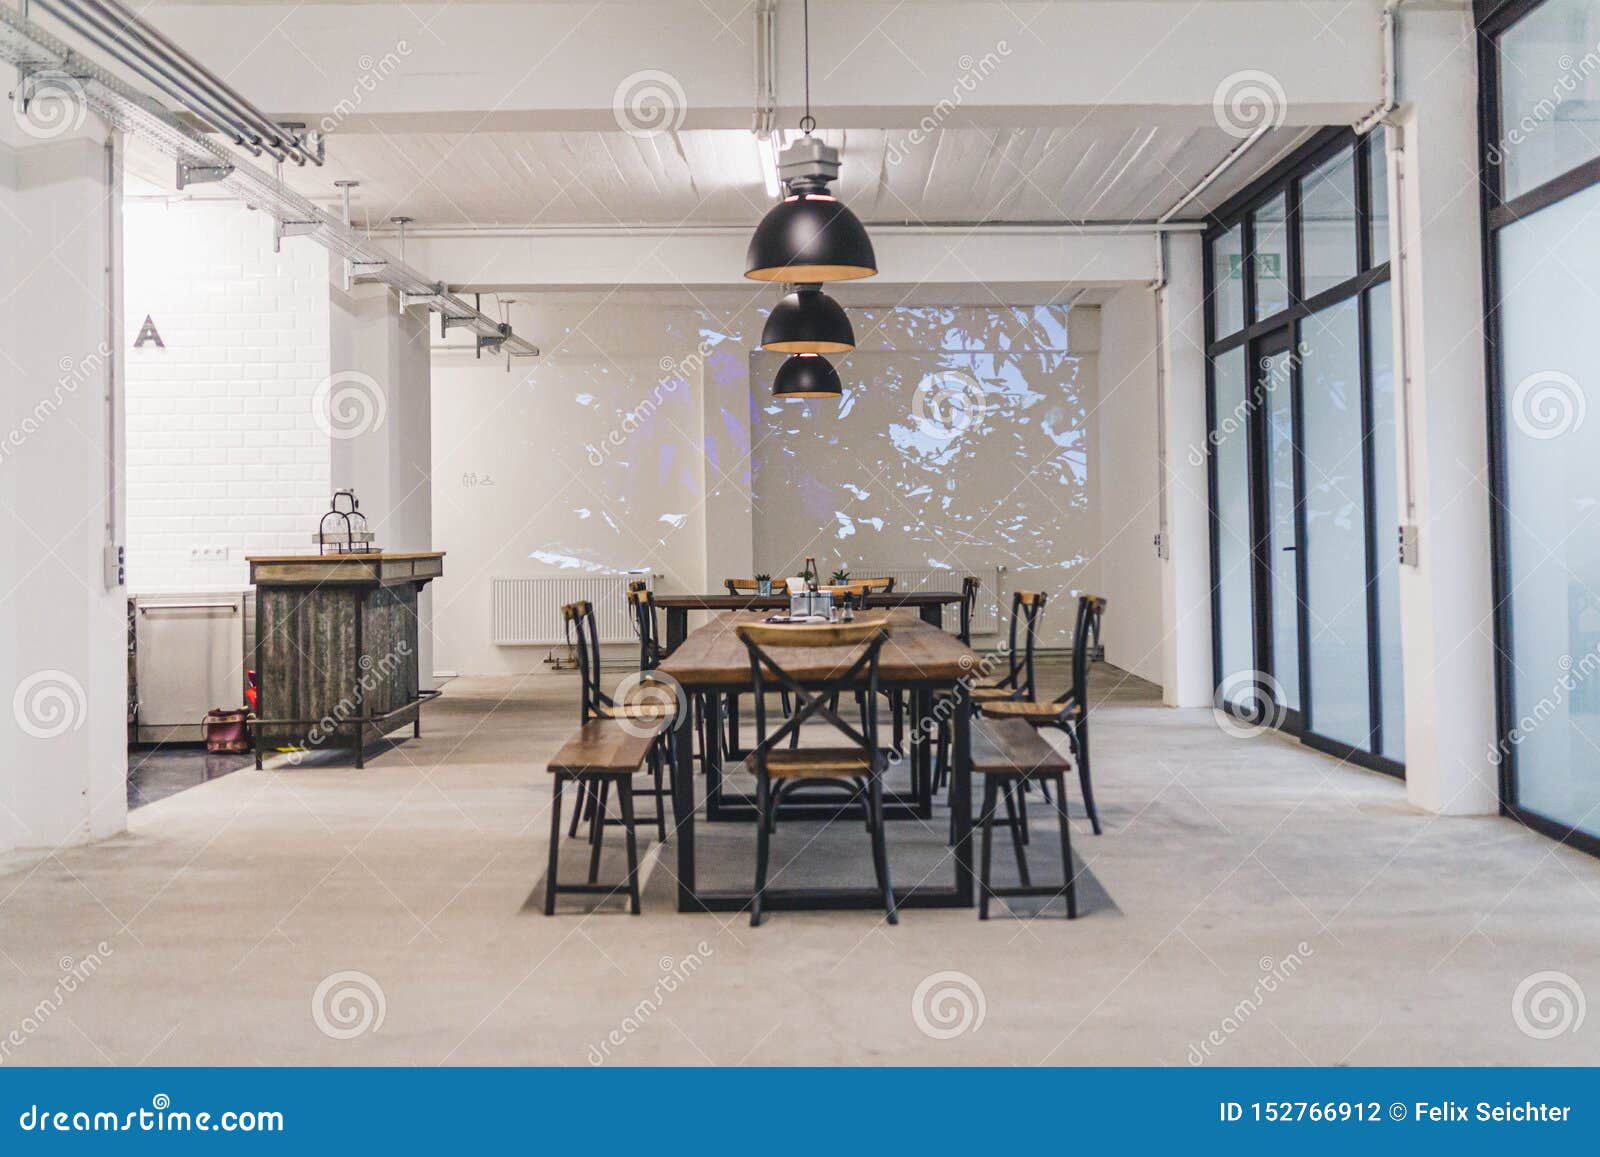 Dining Room Of A Modern Office With Industrial Tables And Chairs Stock Photo Image Of Indoors Dark 152766912